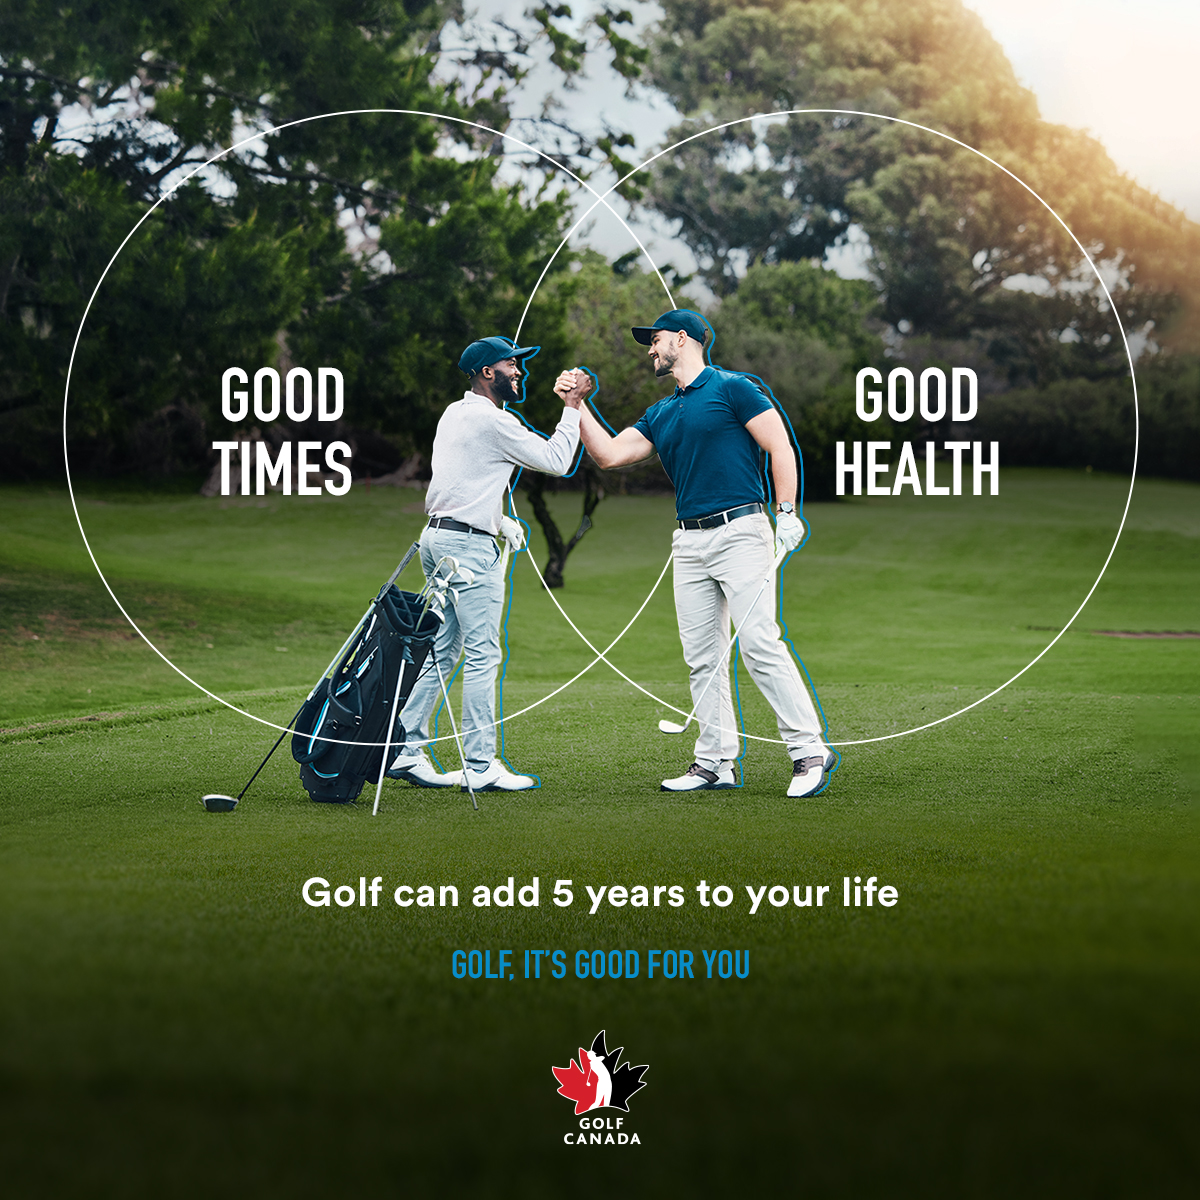 Tee it up for your health! 💪 Golf offers a longer and happier life through exercise, fresh air, and the joy of the game. Learn more about the many health benefits of playing golf: 👉 health.golfcanada.ca